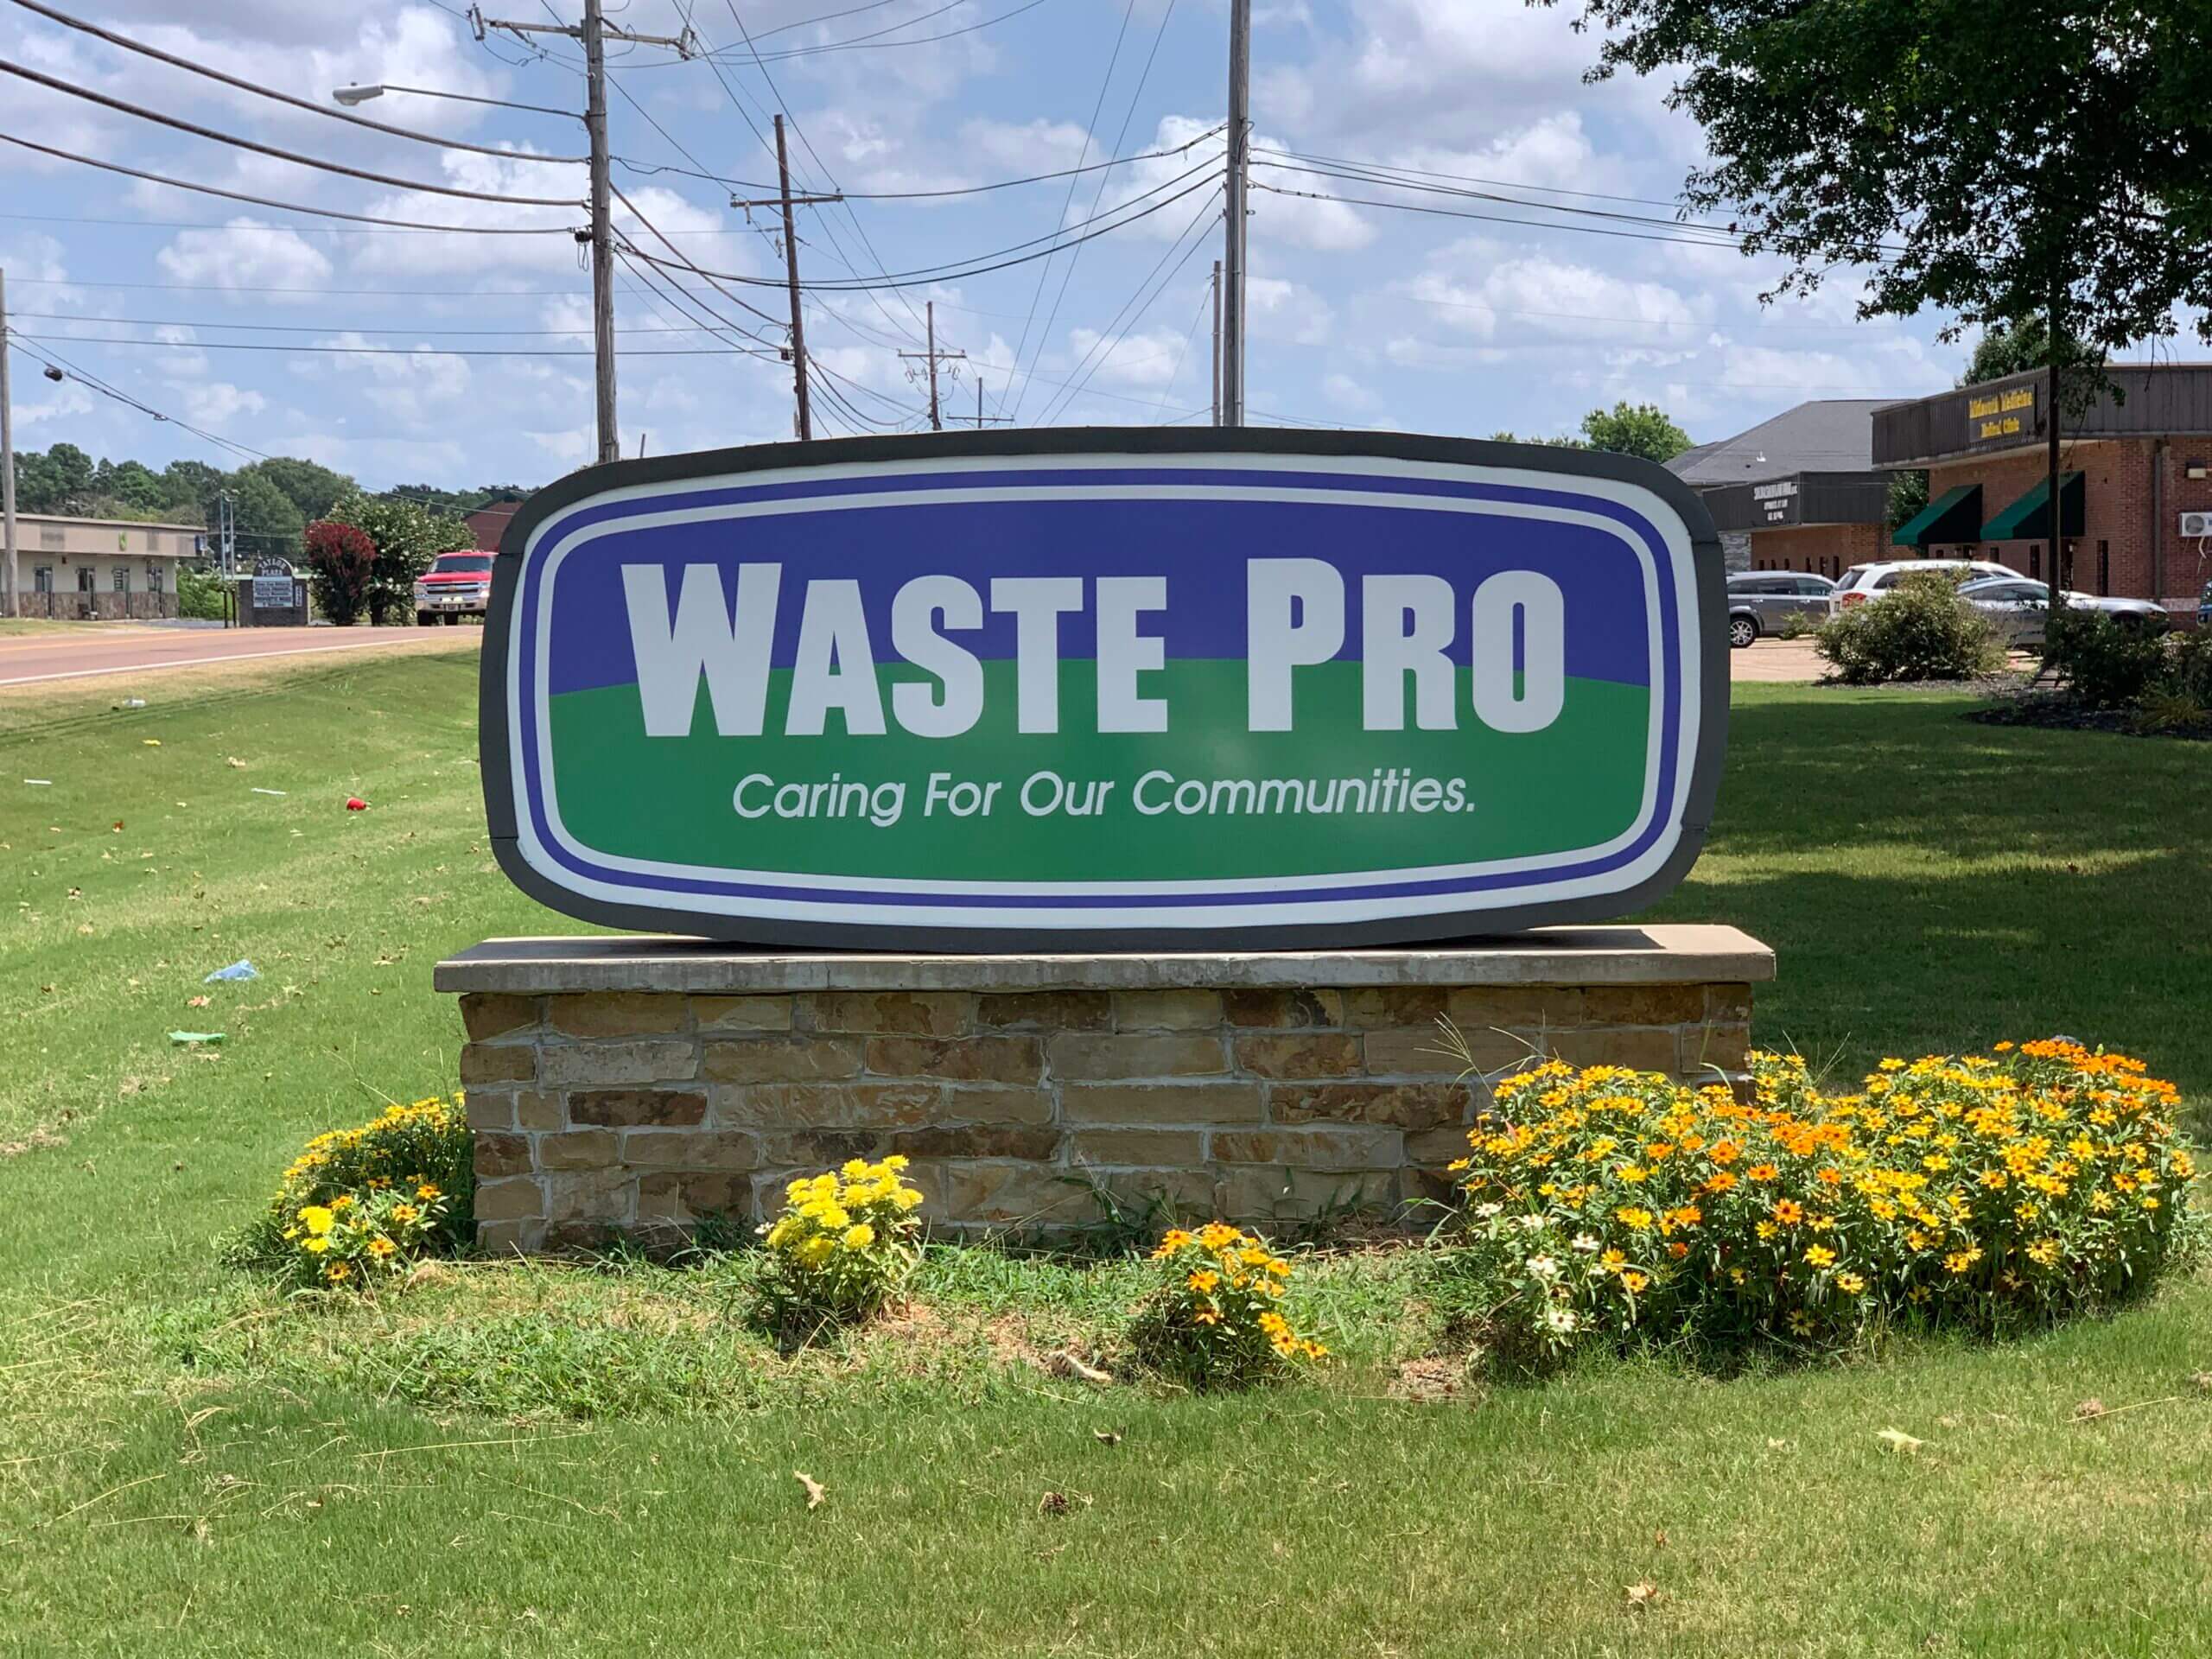 Hiring event set for Waste Pro drivers